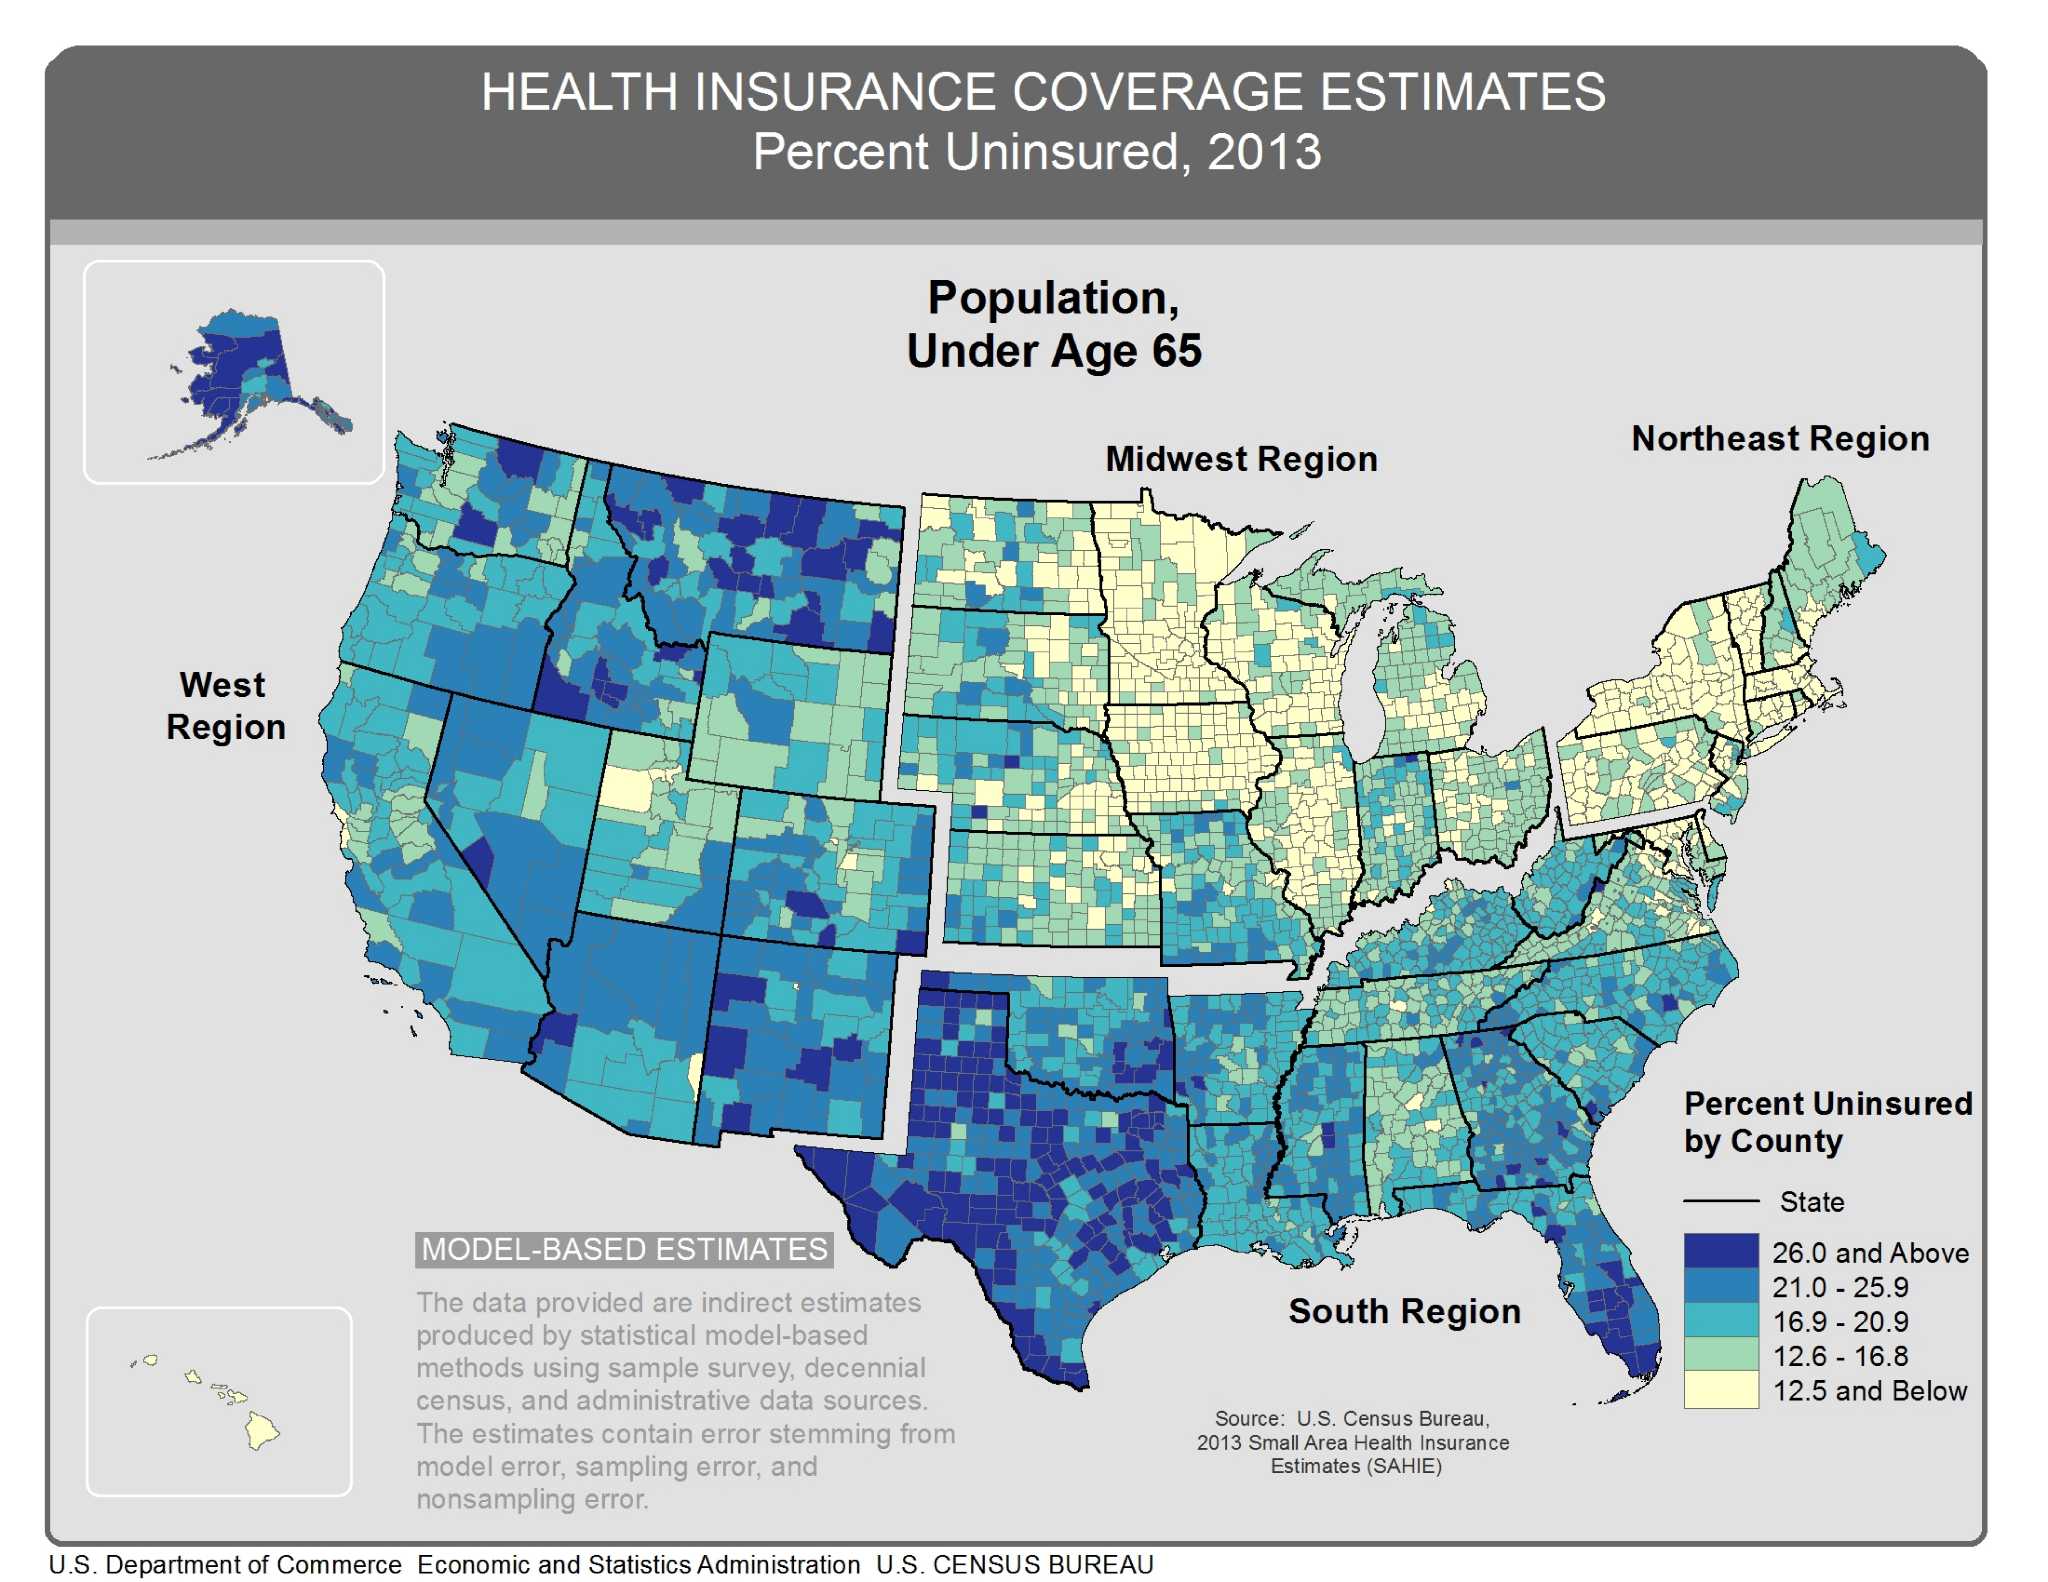 Texas has lowest health insurance coverage rates, official data shows - Houston Chronicle